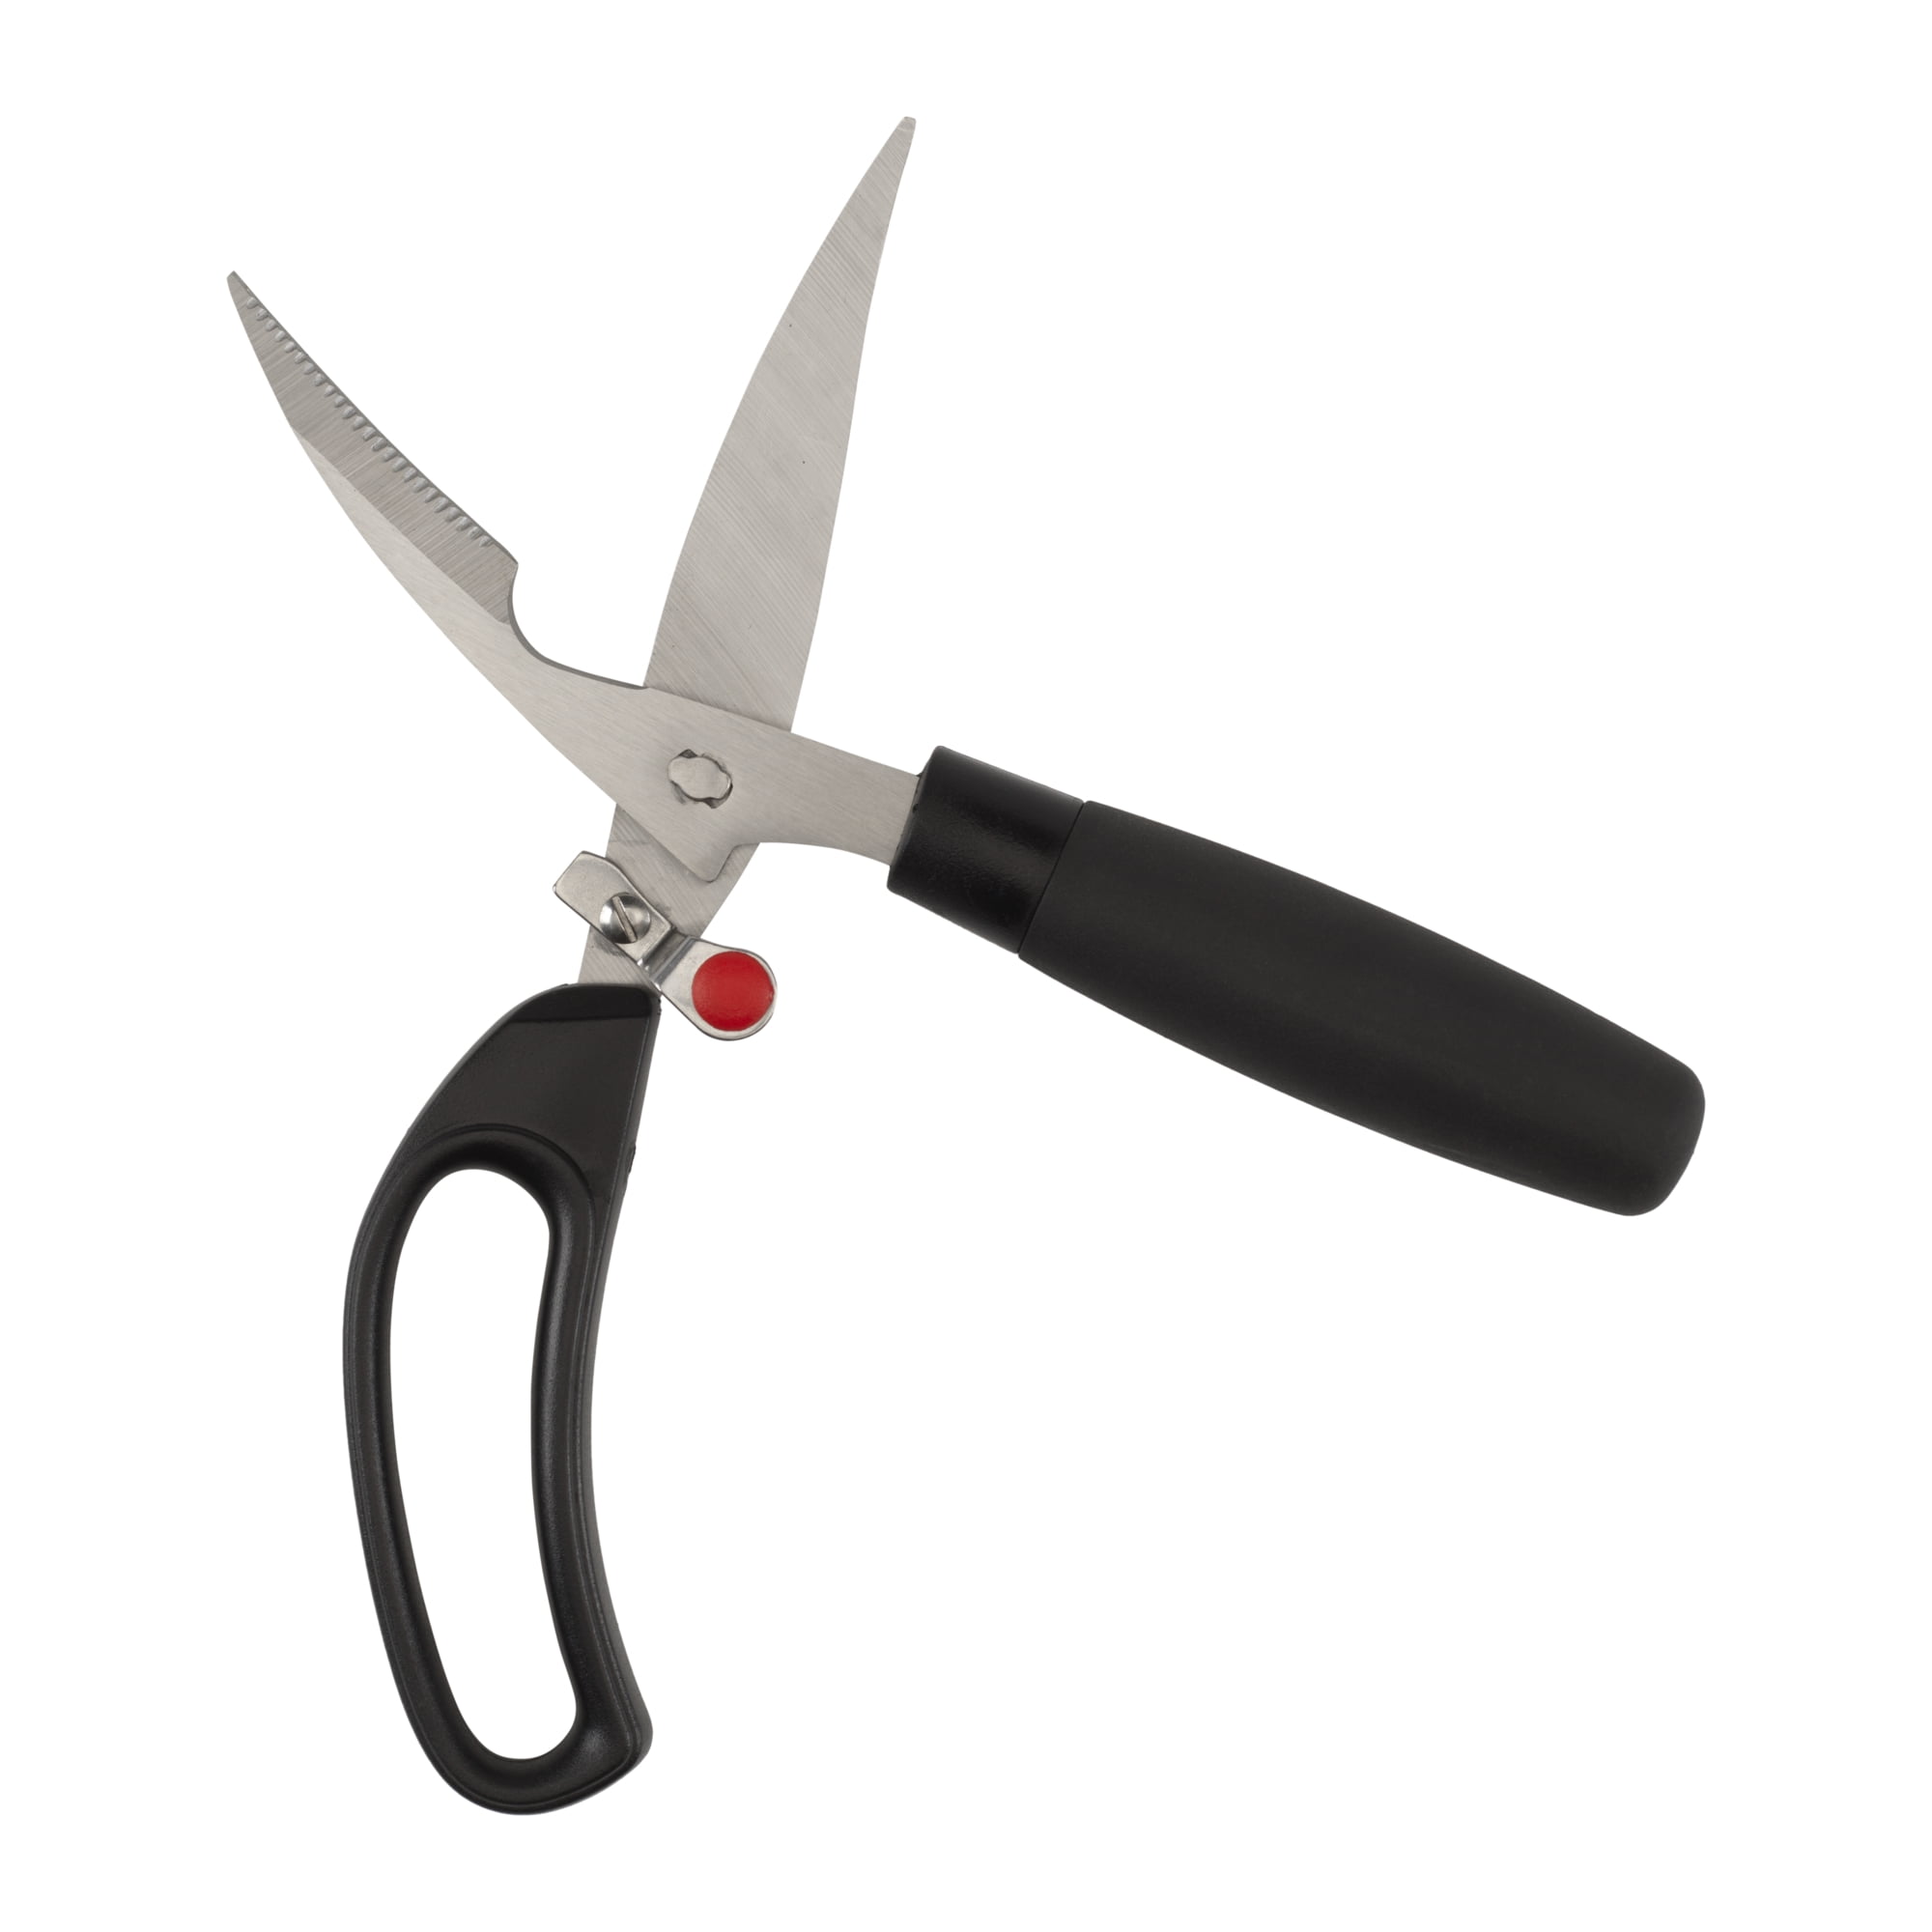  Gela Global SC-0285 Poultry Shears Sharp & Extra Strong Scissors,  Black/Grey: Home & Kitchen